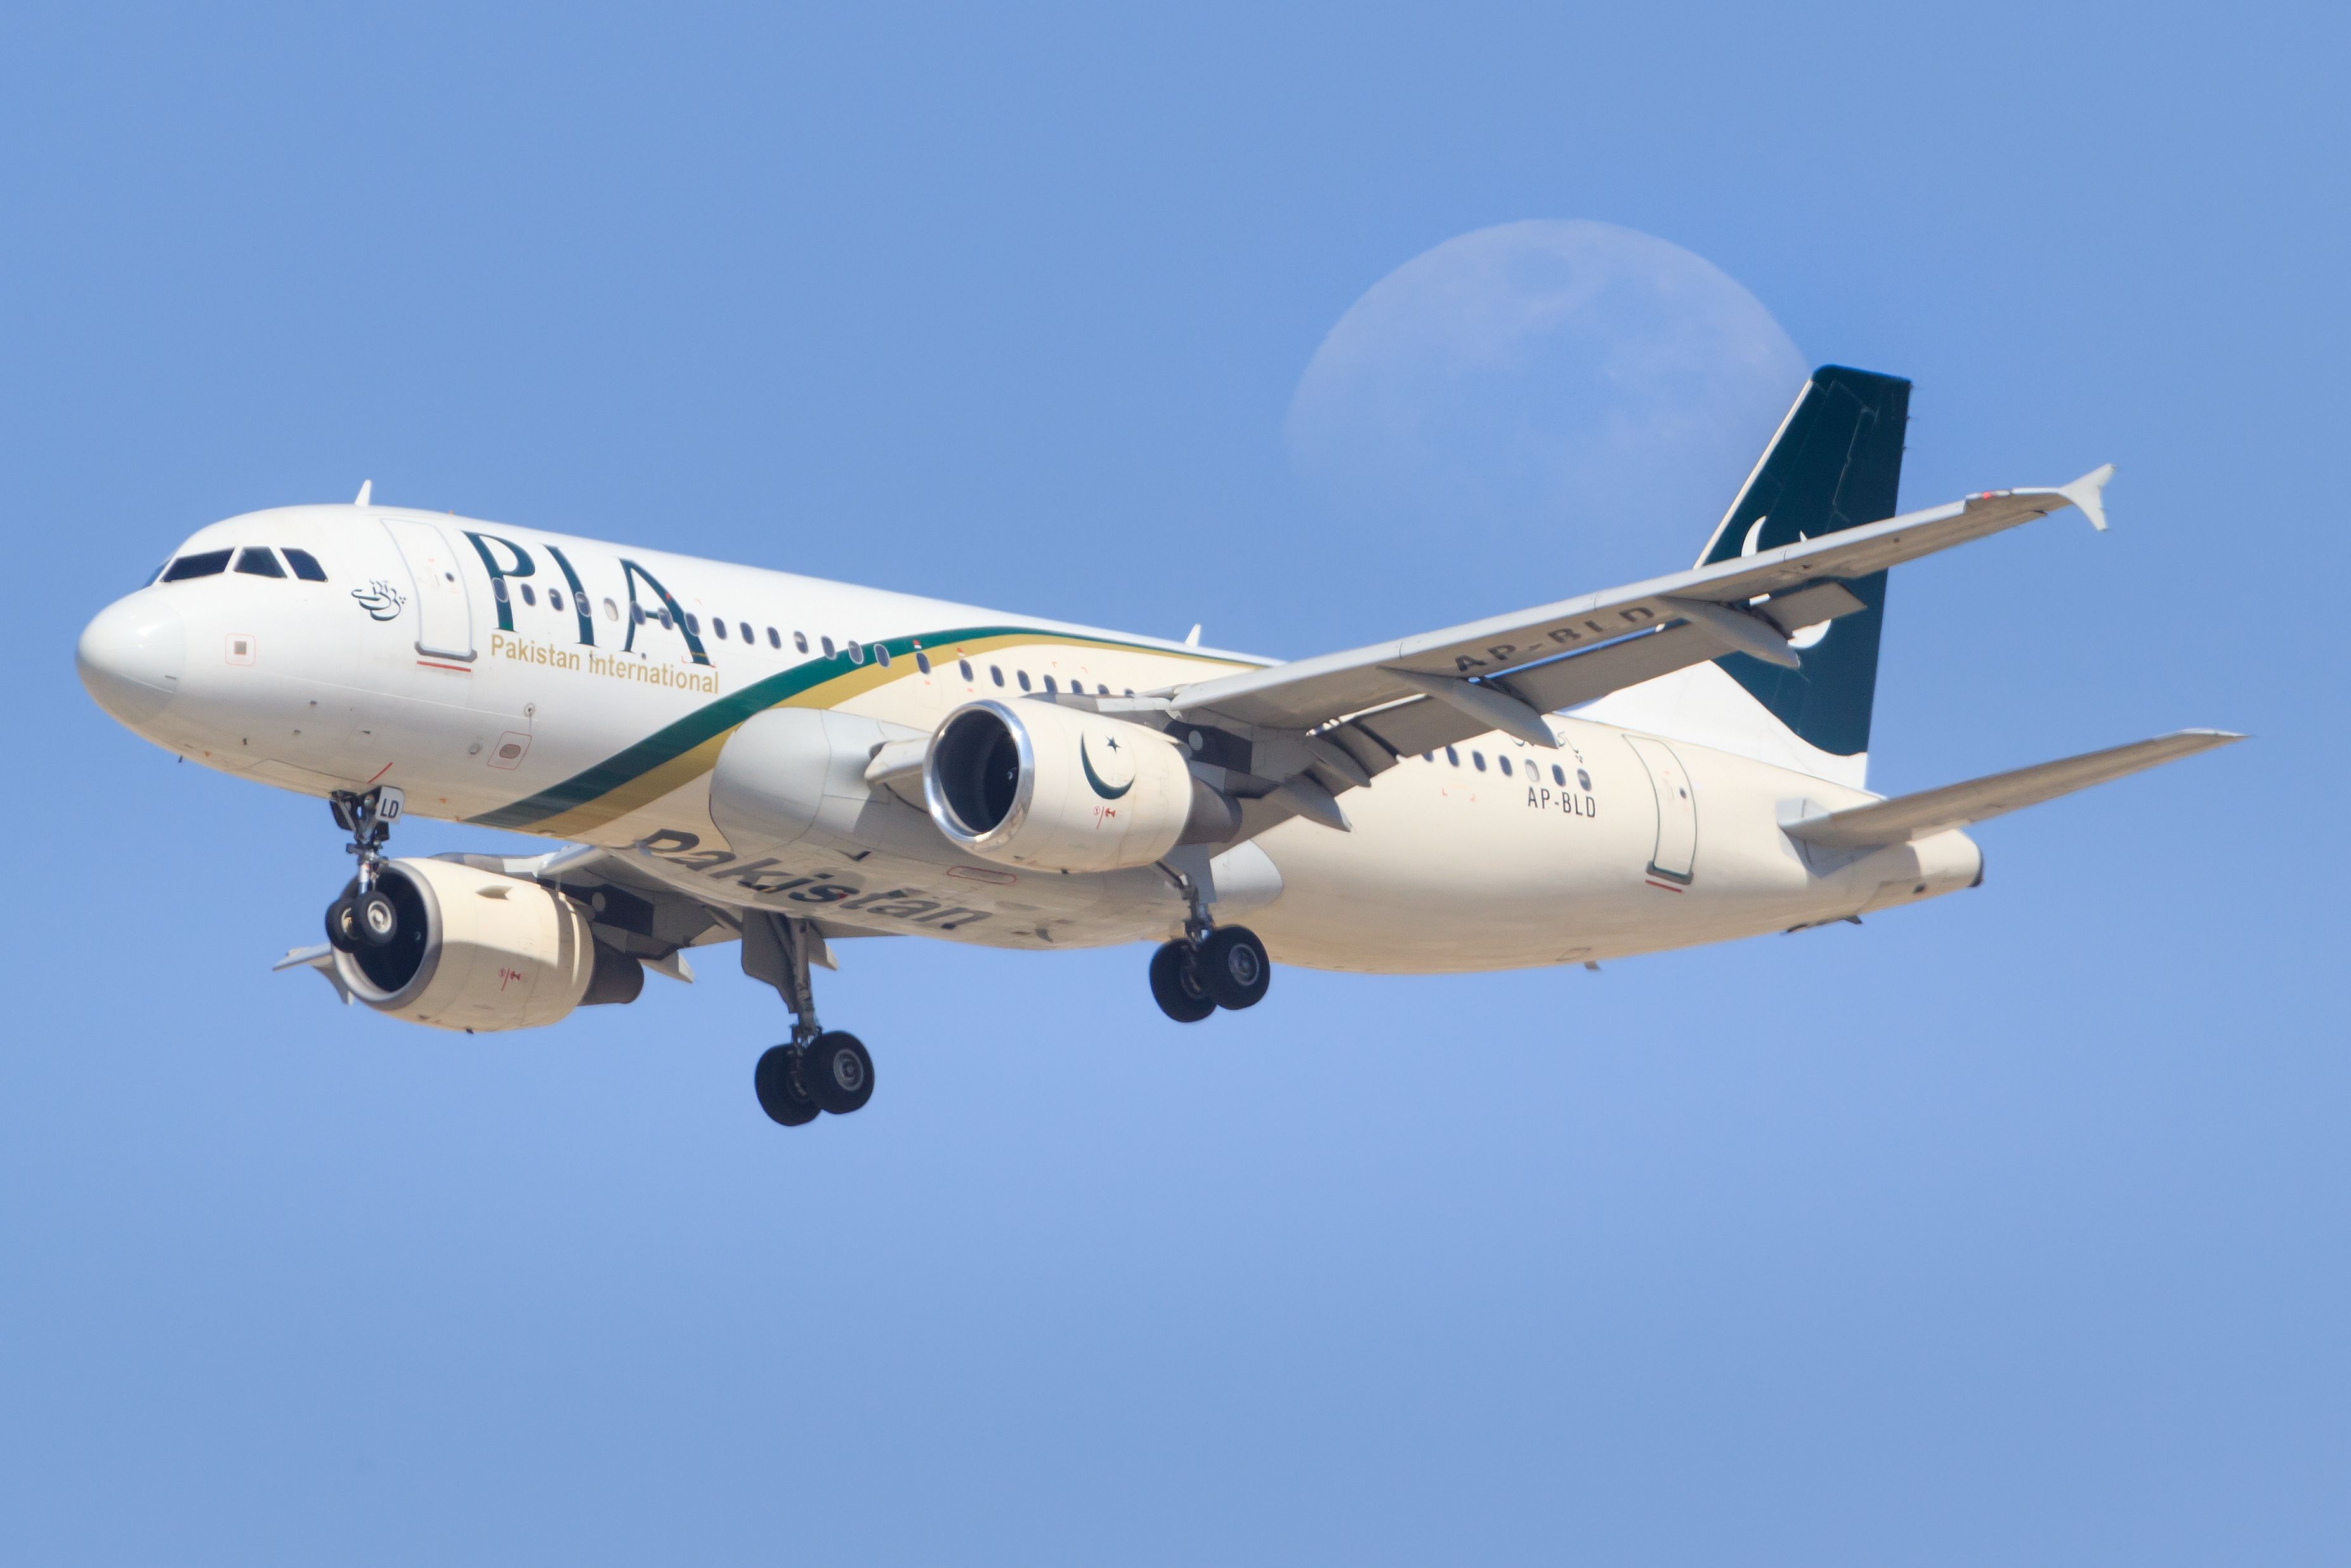 Airbus A320 from PIA landing at Dubai Airport.